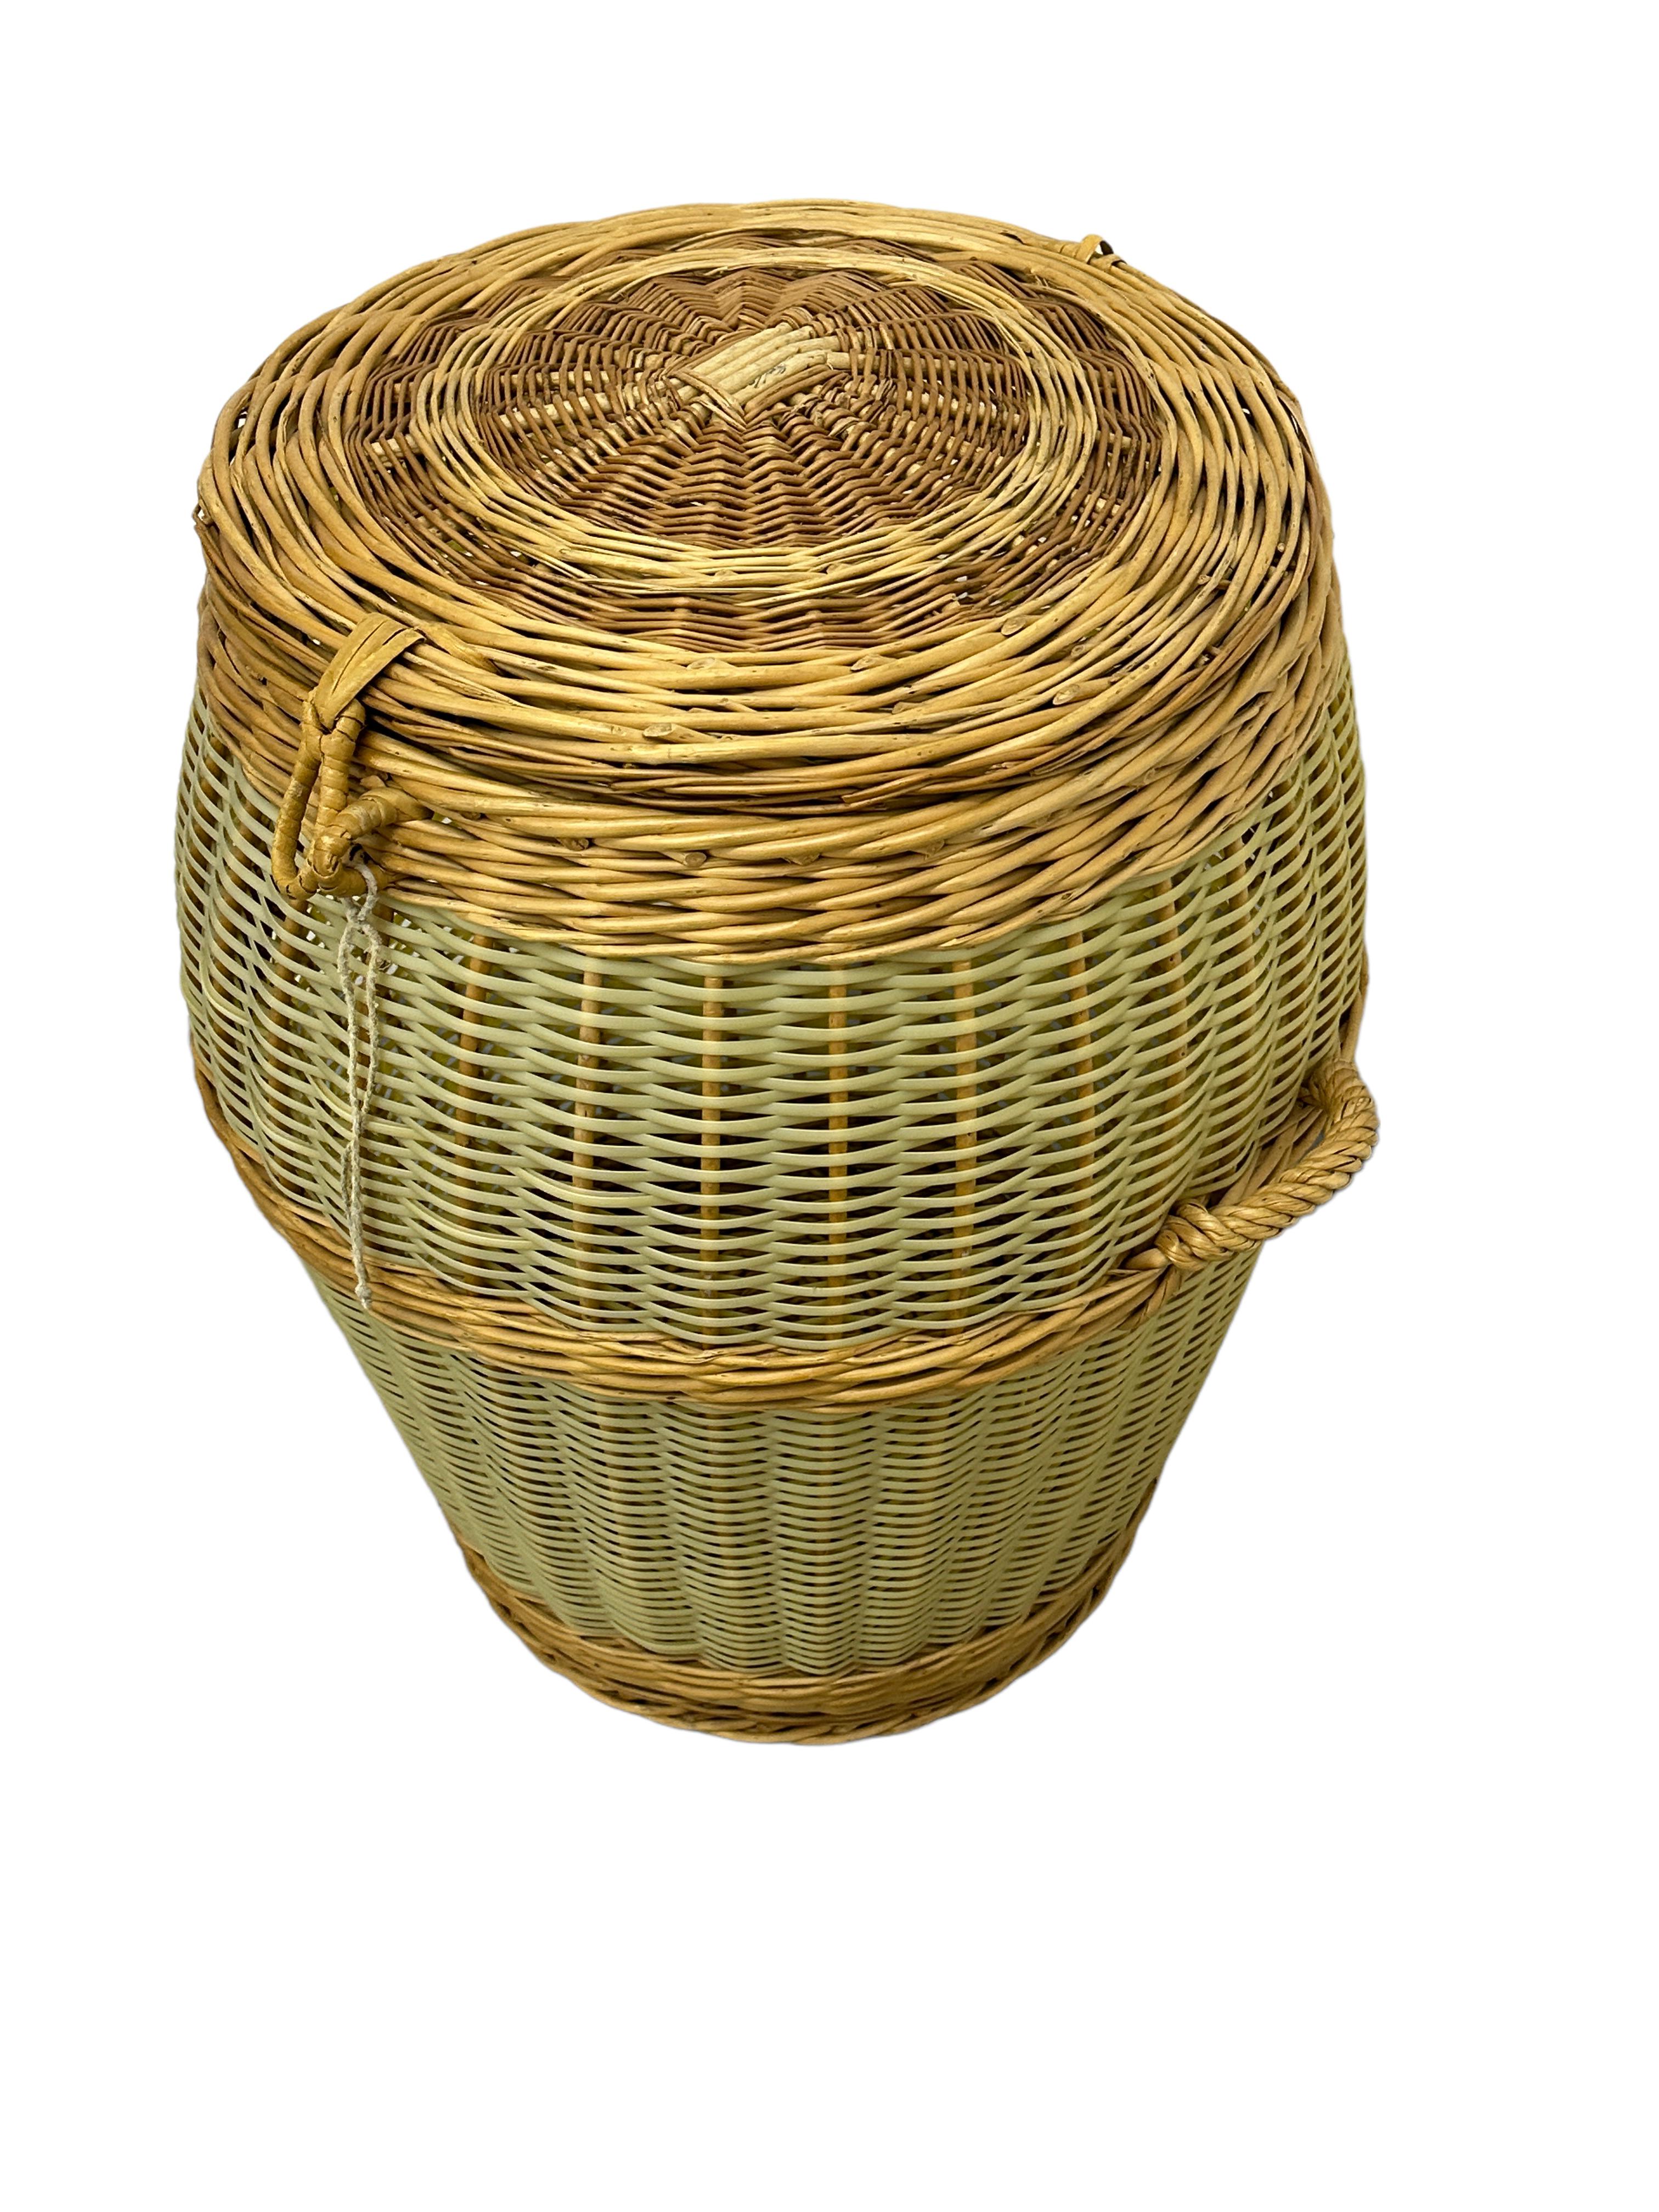 Hand-Crafted Stunning Large Vintage Midcentury Wicker Laundry Basket Hamper, 1970s, Italy